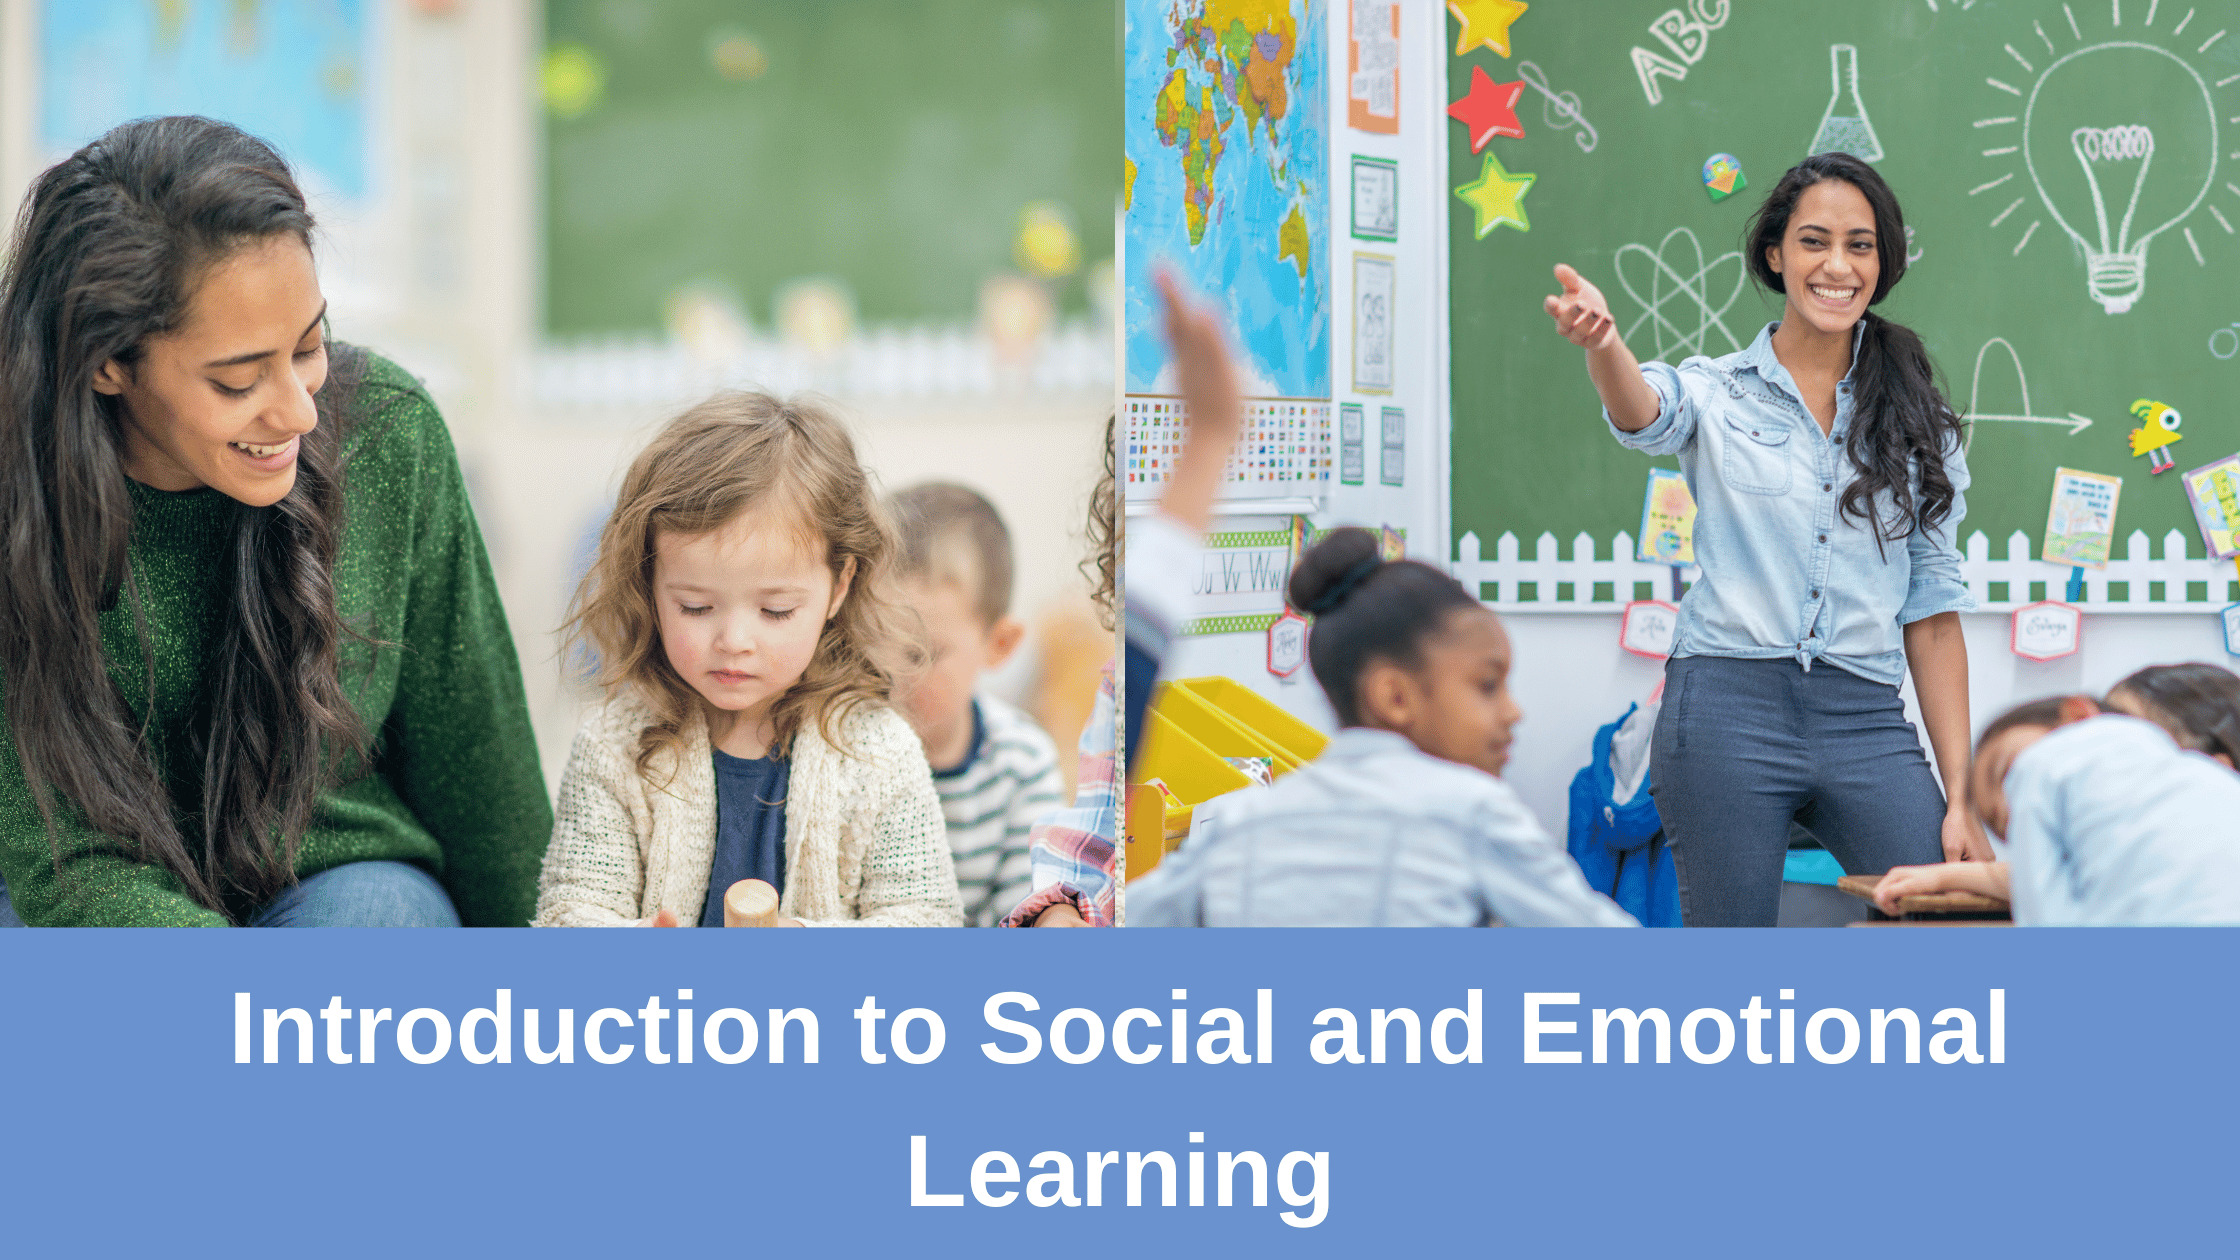 Introduction to Social and Emotional Learning